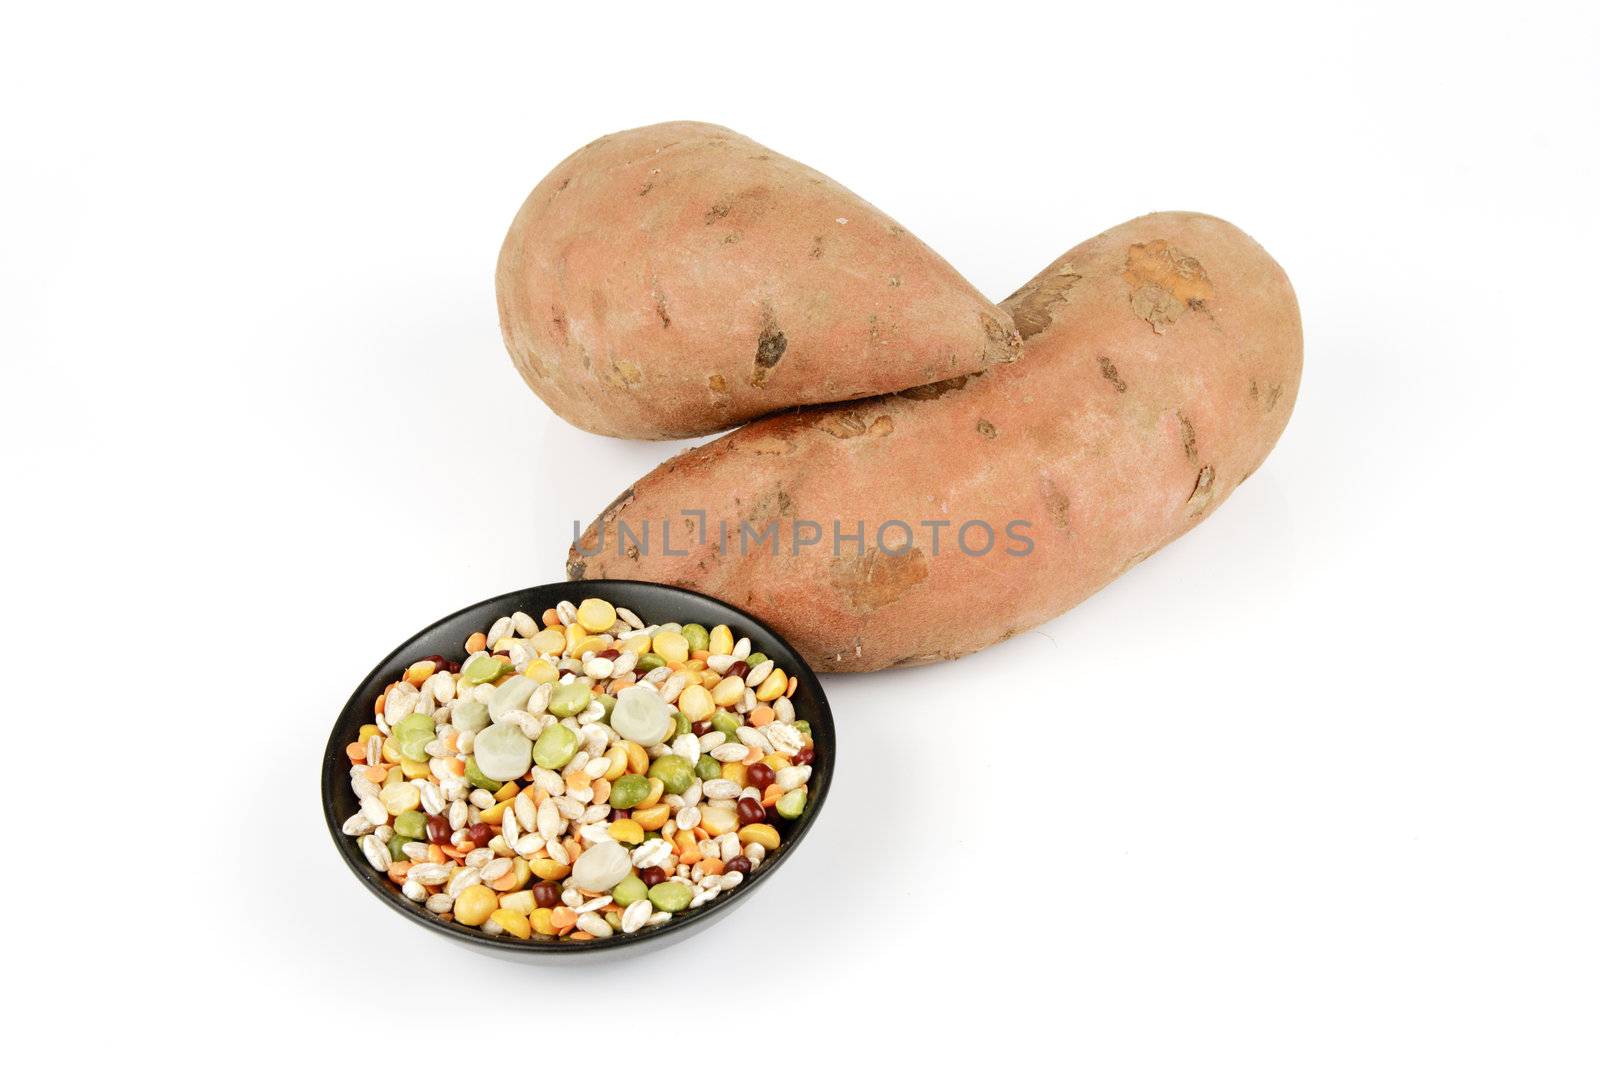 Two raw unpeeled sweet potatoes with a small black dish of soup pulses on a reflective white background